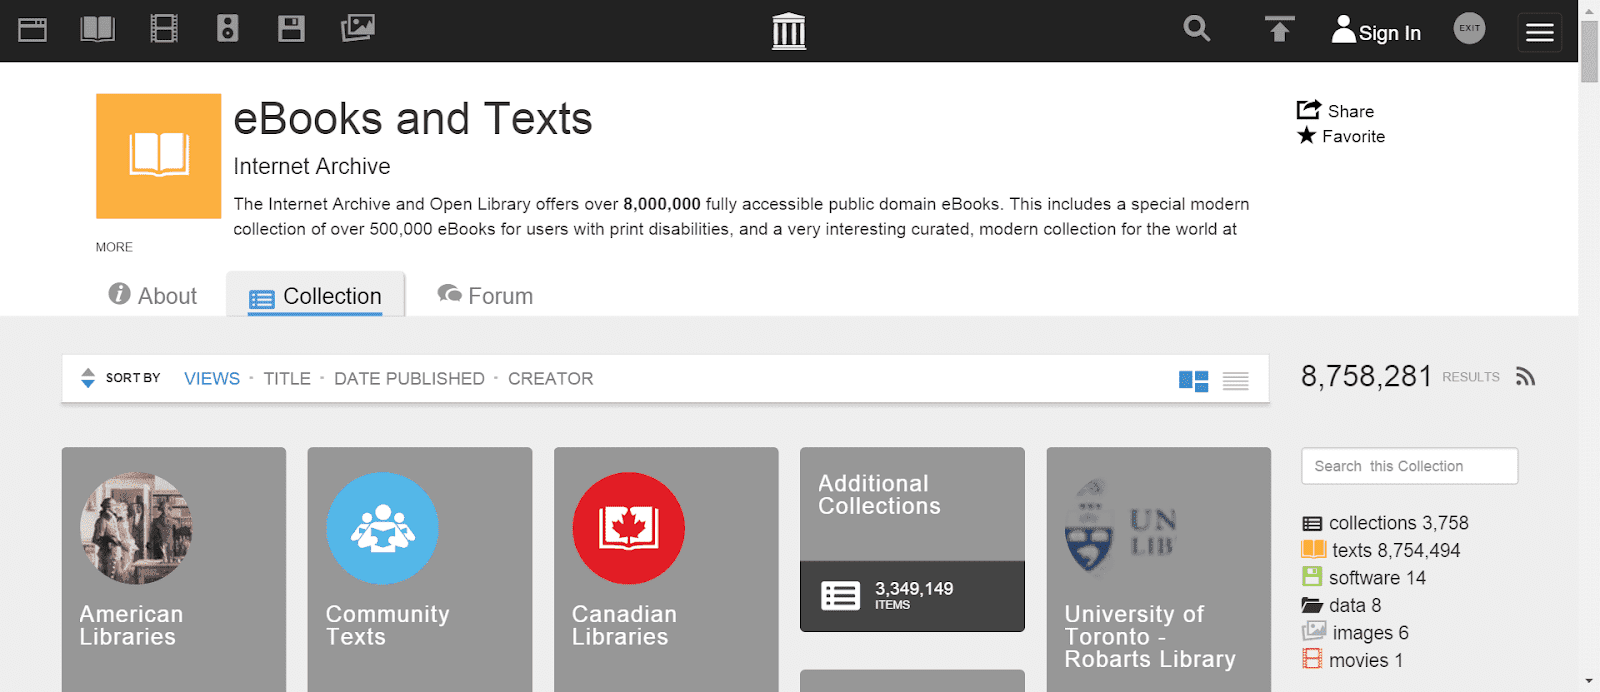 Sites txt. Archive text. Text about Internet. Internet Archive. Robarts Library.